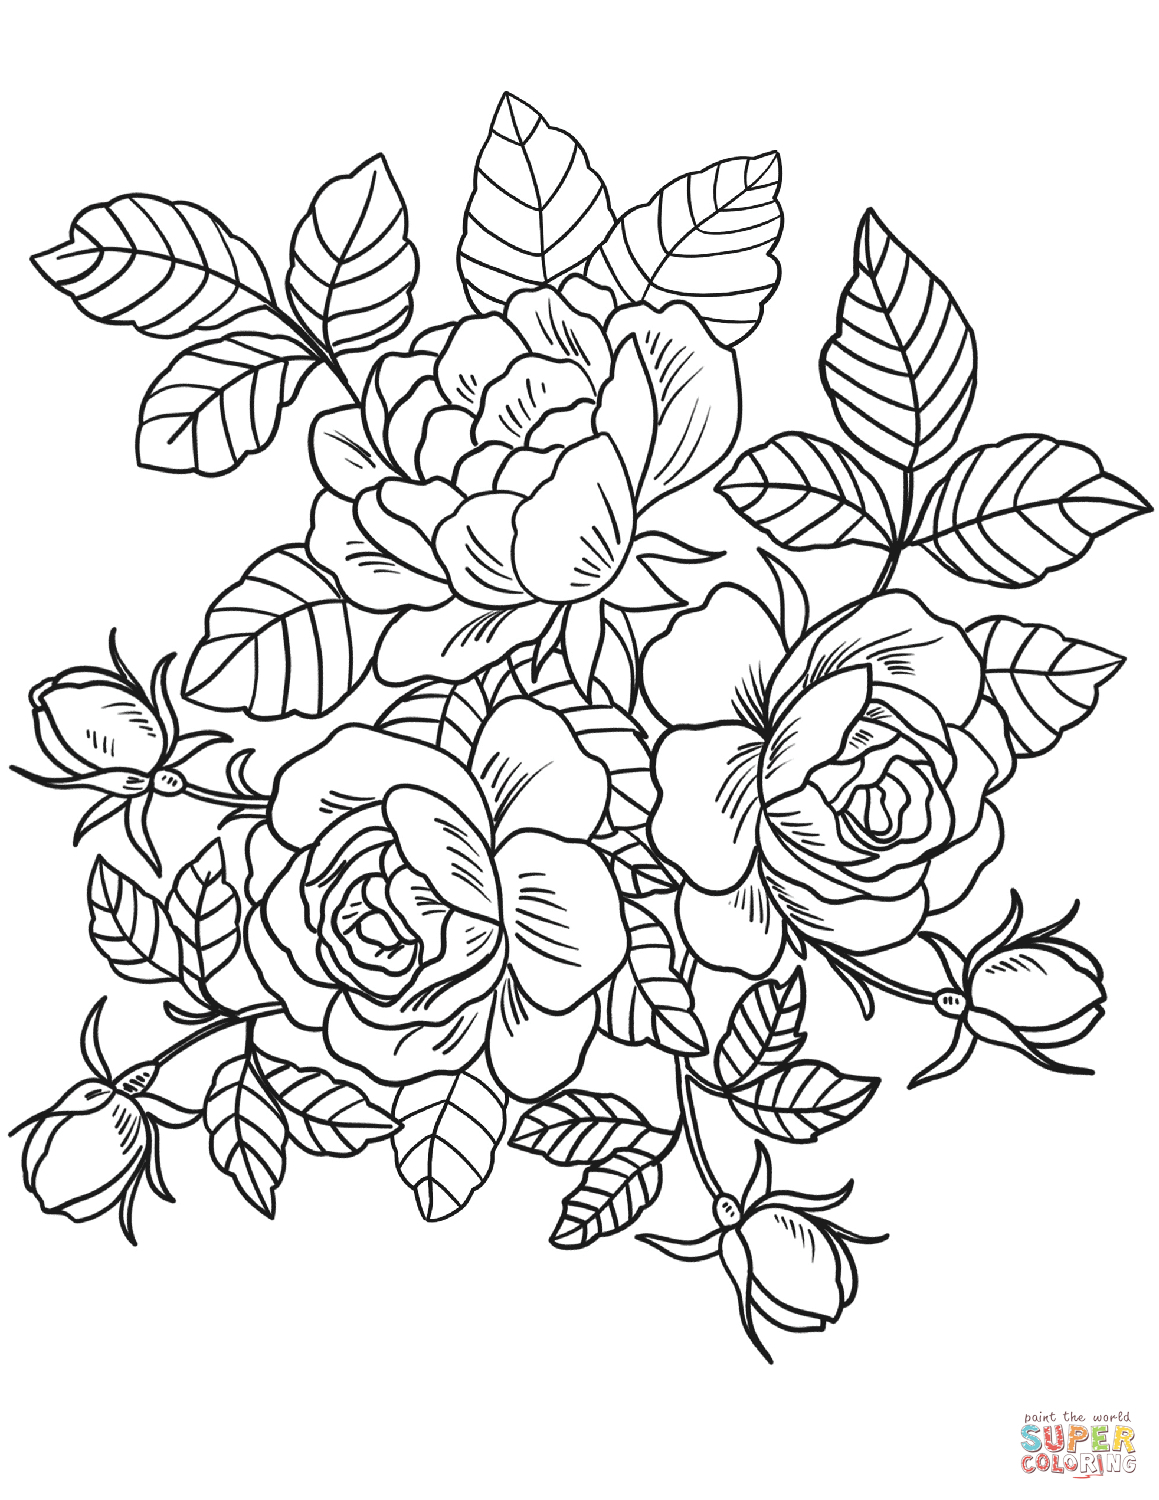 Flowers Coloring Pages Roses Flowers Coloring Page Free Printable - Free Printable Roses